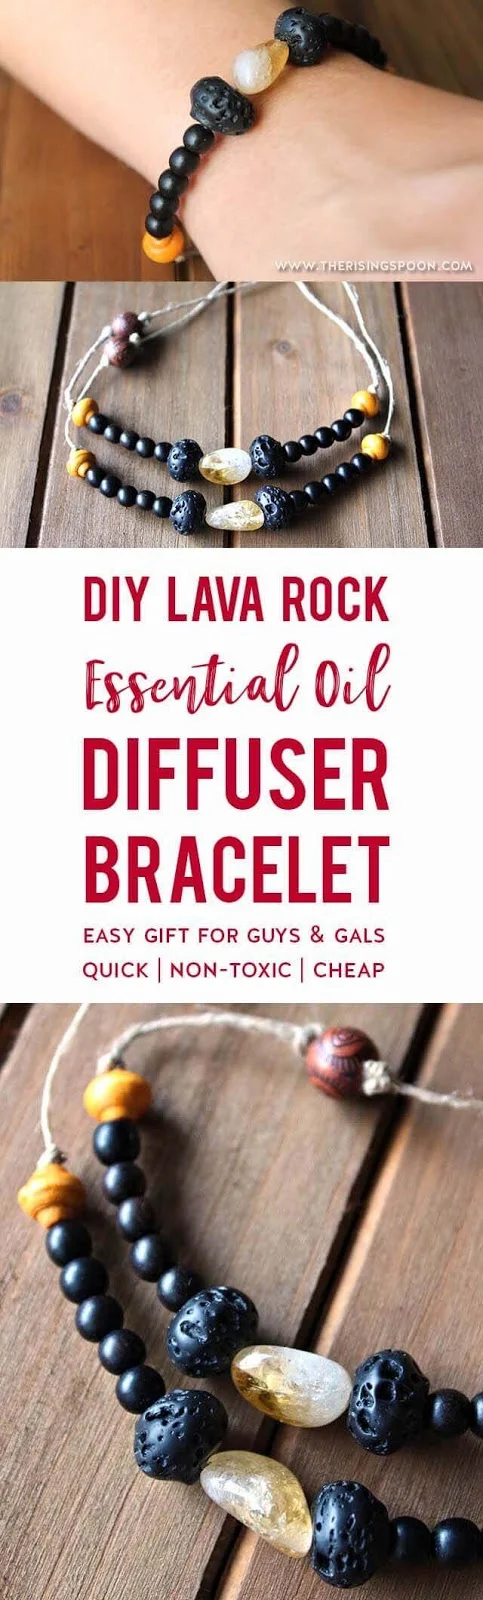 Learn how to make an easy essential oil diffuser bracelet using inexpensive non-toxic materials like citrine stone, porous lava rock, and hemp cord. Decorate the bracelet with your favorite accent beads to make it look unique while you enjoy the aromatherapy benefits. This makes a great DIY gift for both gals and guys and is a simple enough craft project for kids to help out.